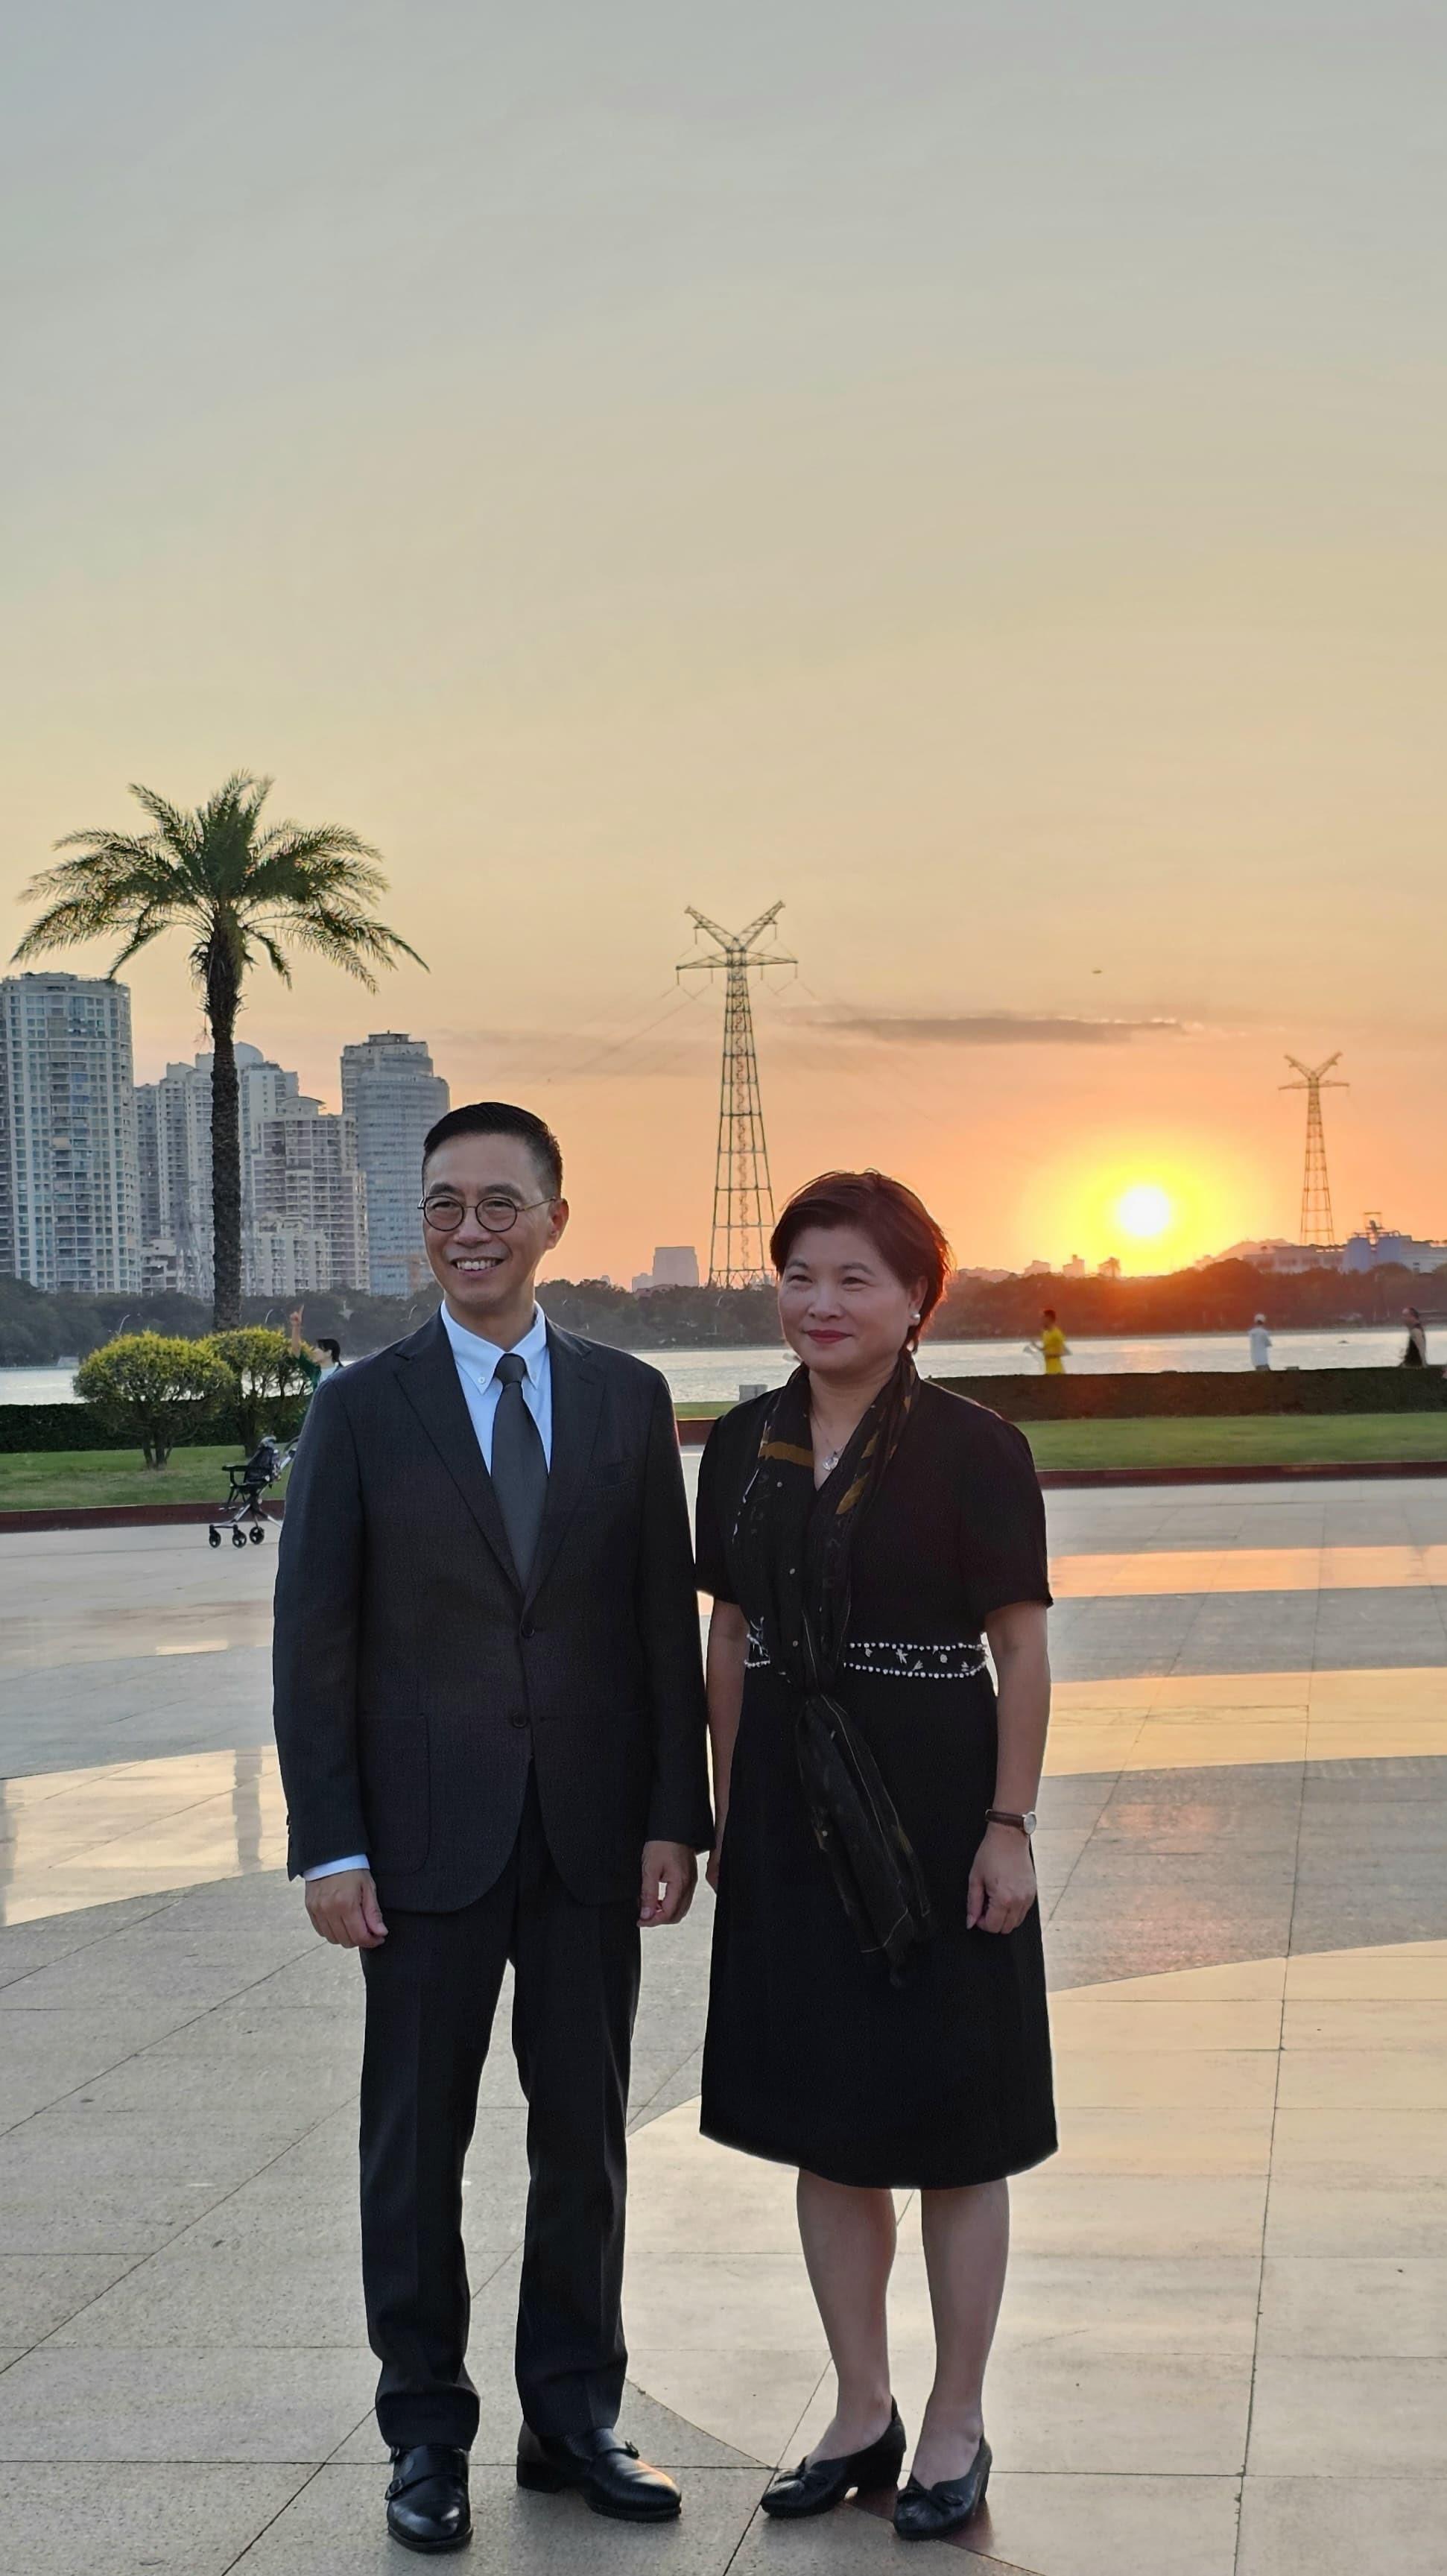 The Secretary for Culture, Sports and Tourism, Mr Kevin Yeung (left), visited the Xiamen waterfront area with Head of the Culture and Tourism Bureau of Xiamen, Ms Huang Bishan (right), today (November 1) to learn about the promotion of tourism and provision of recreational facilities for the public in Xiamen.